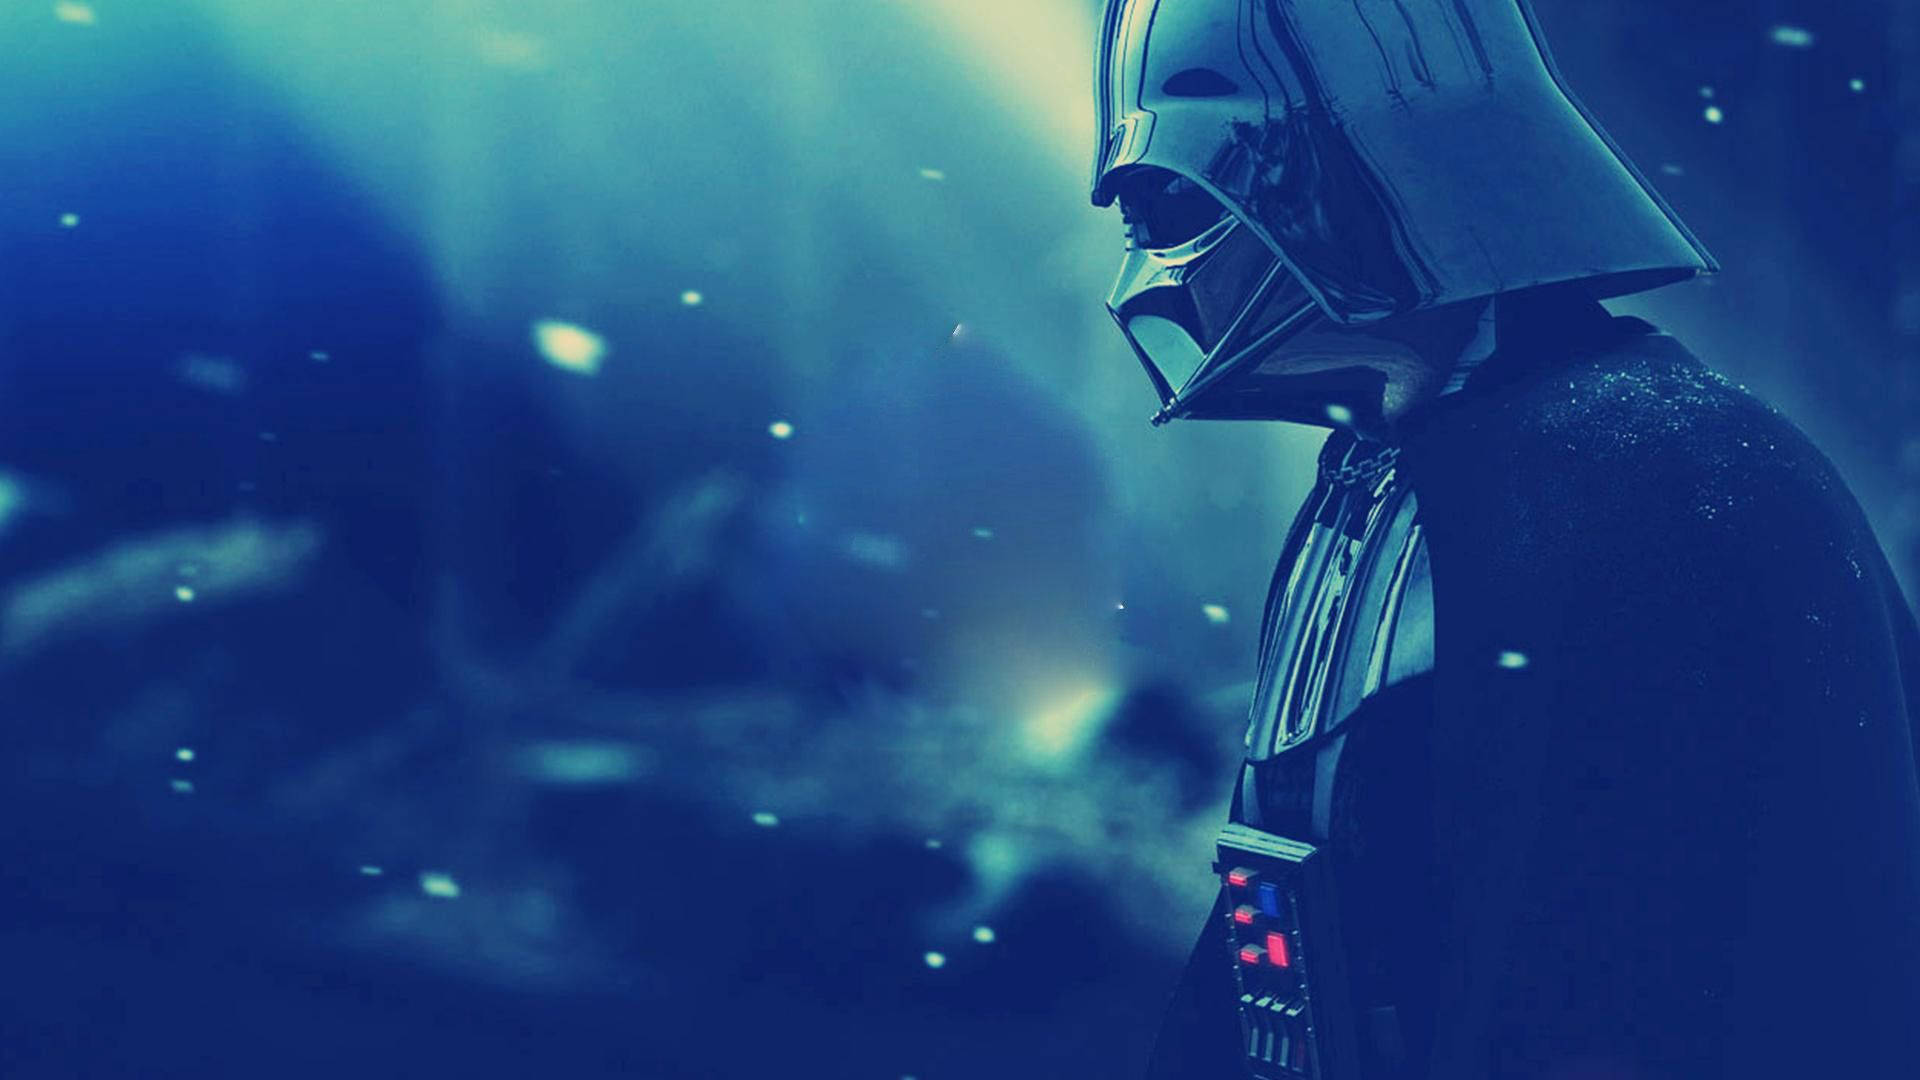 The Dark Lord of the Sith, Darth Vader Wallpaper